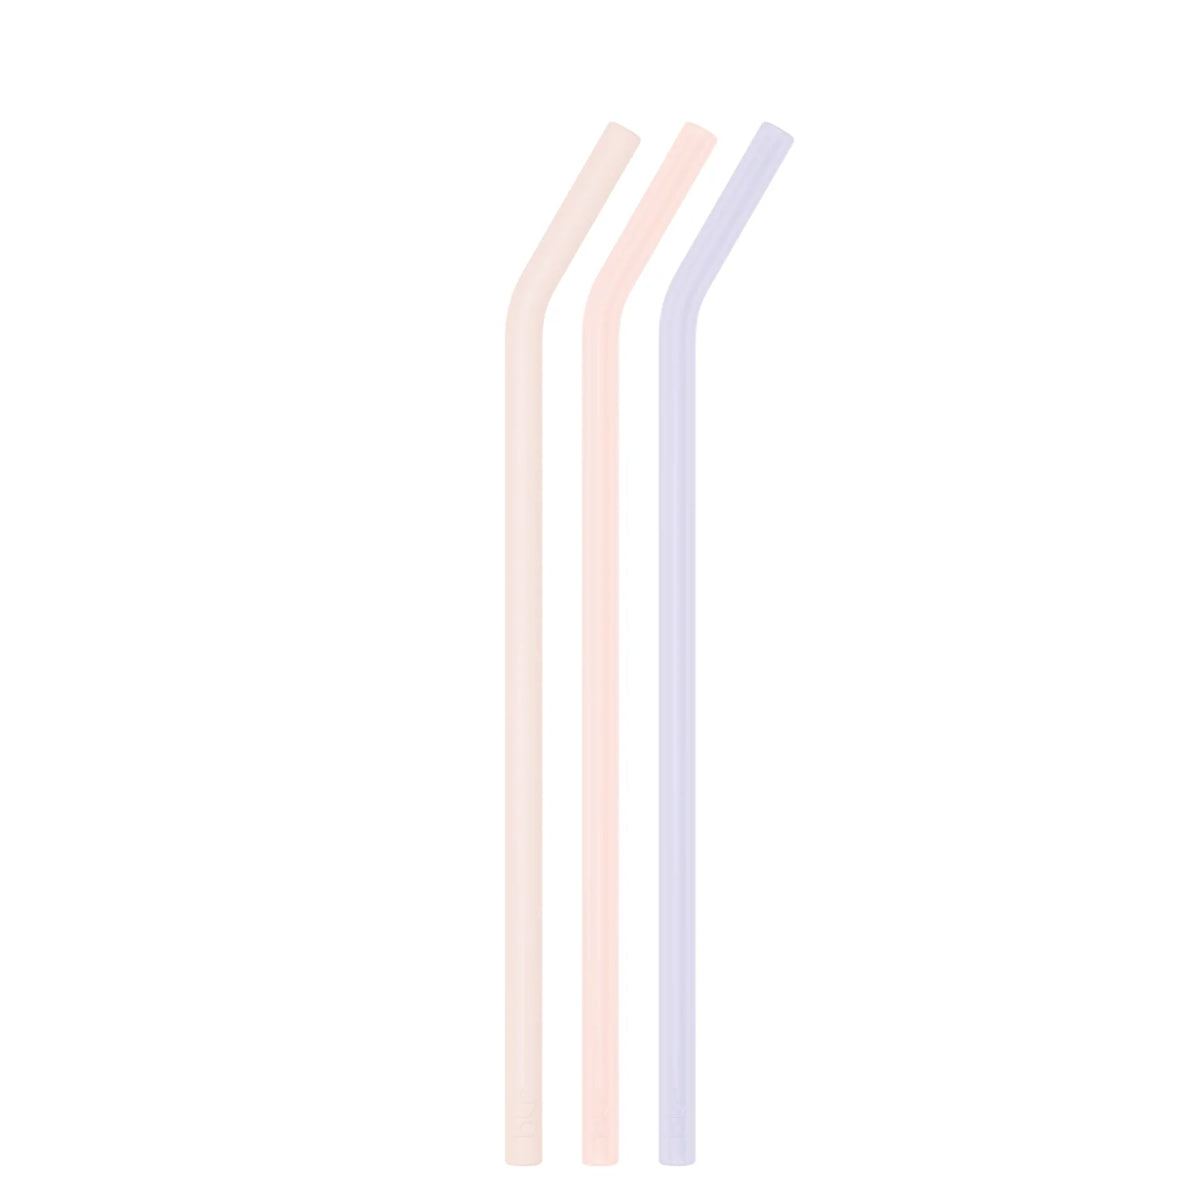 Shop COTTON CANDY STRAWS bkr . Online stores We've got you covered